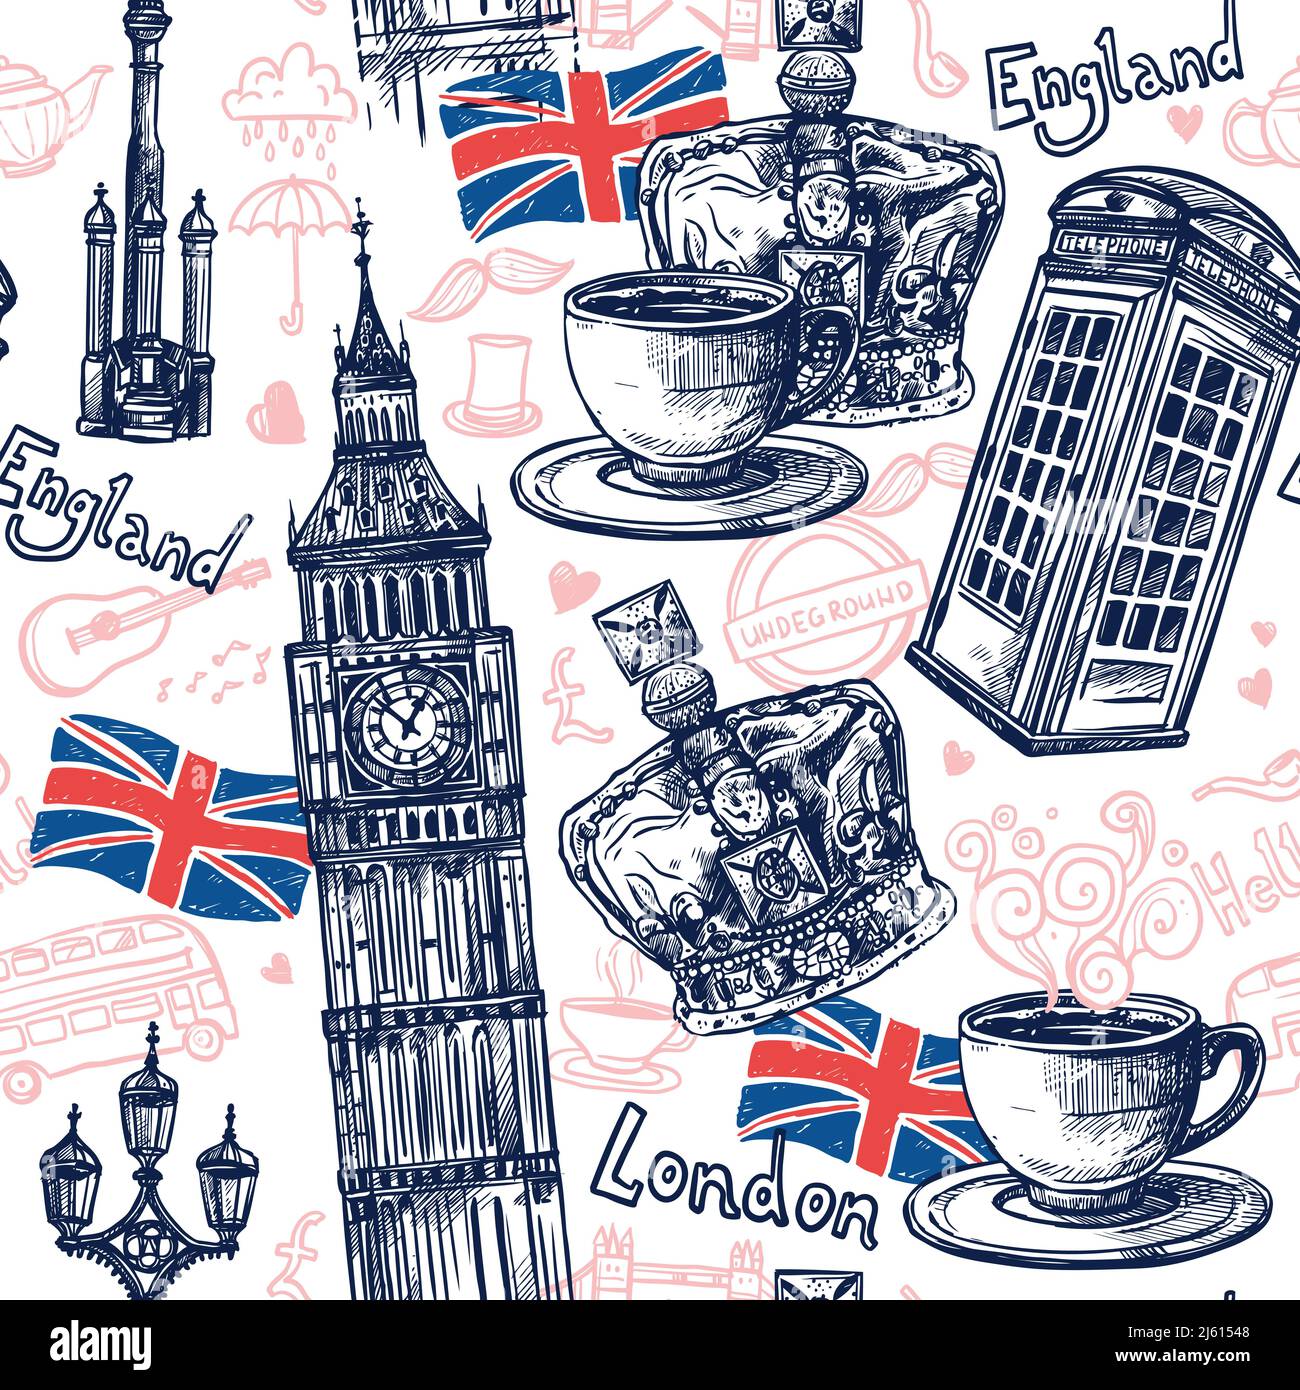 London seamless pattern with sketch telephone booth big ben crown vector illustration Stock Vector